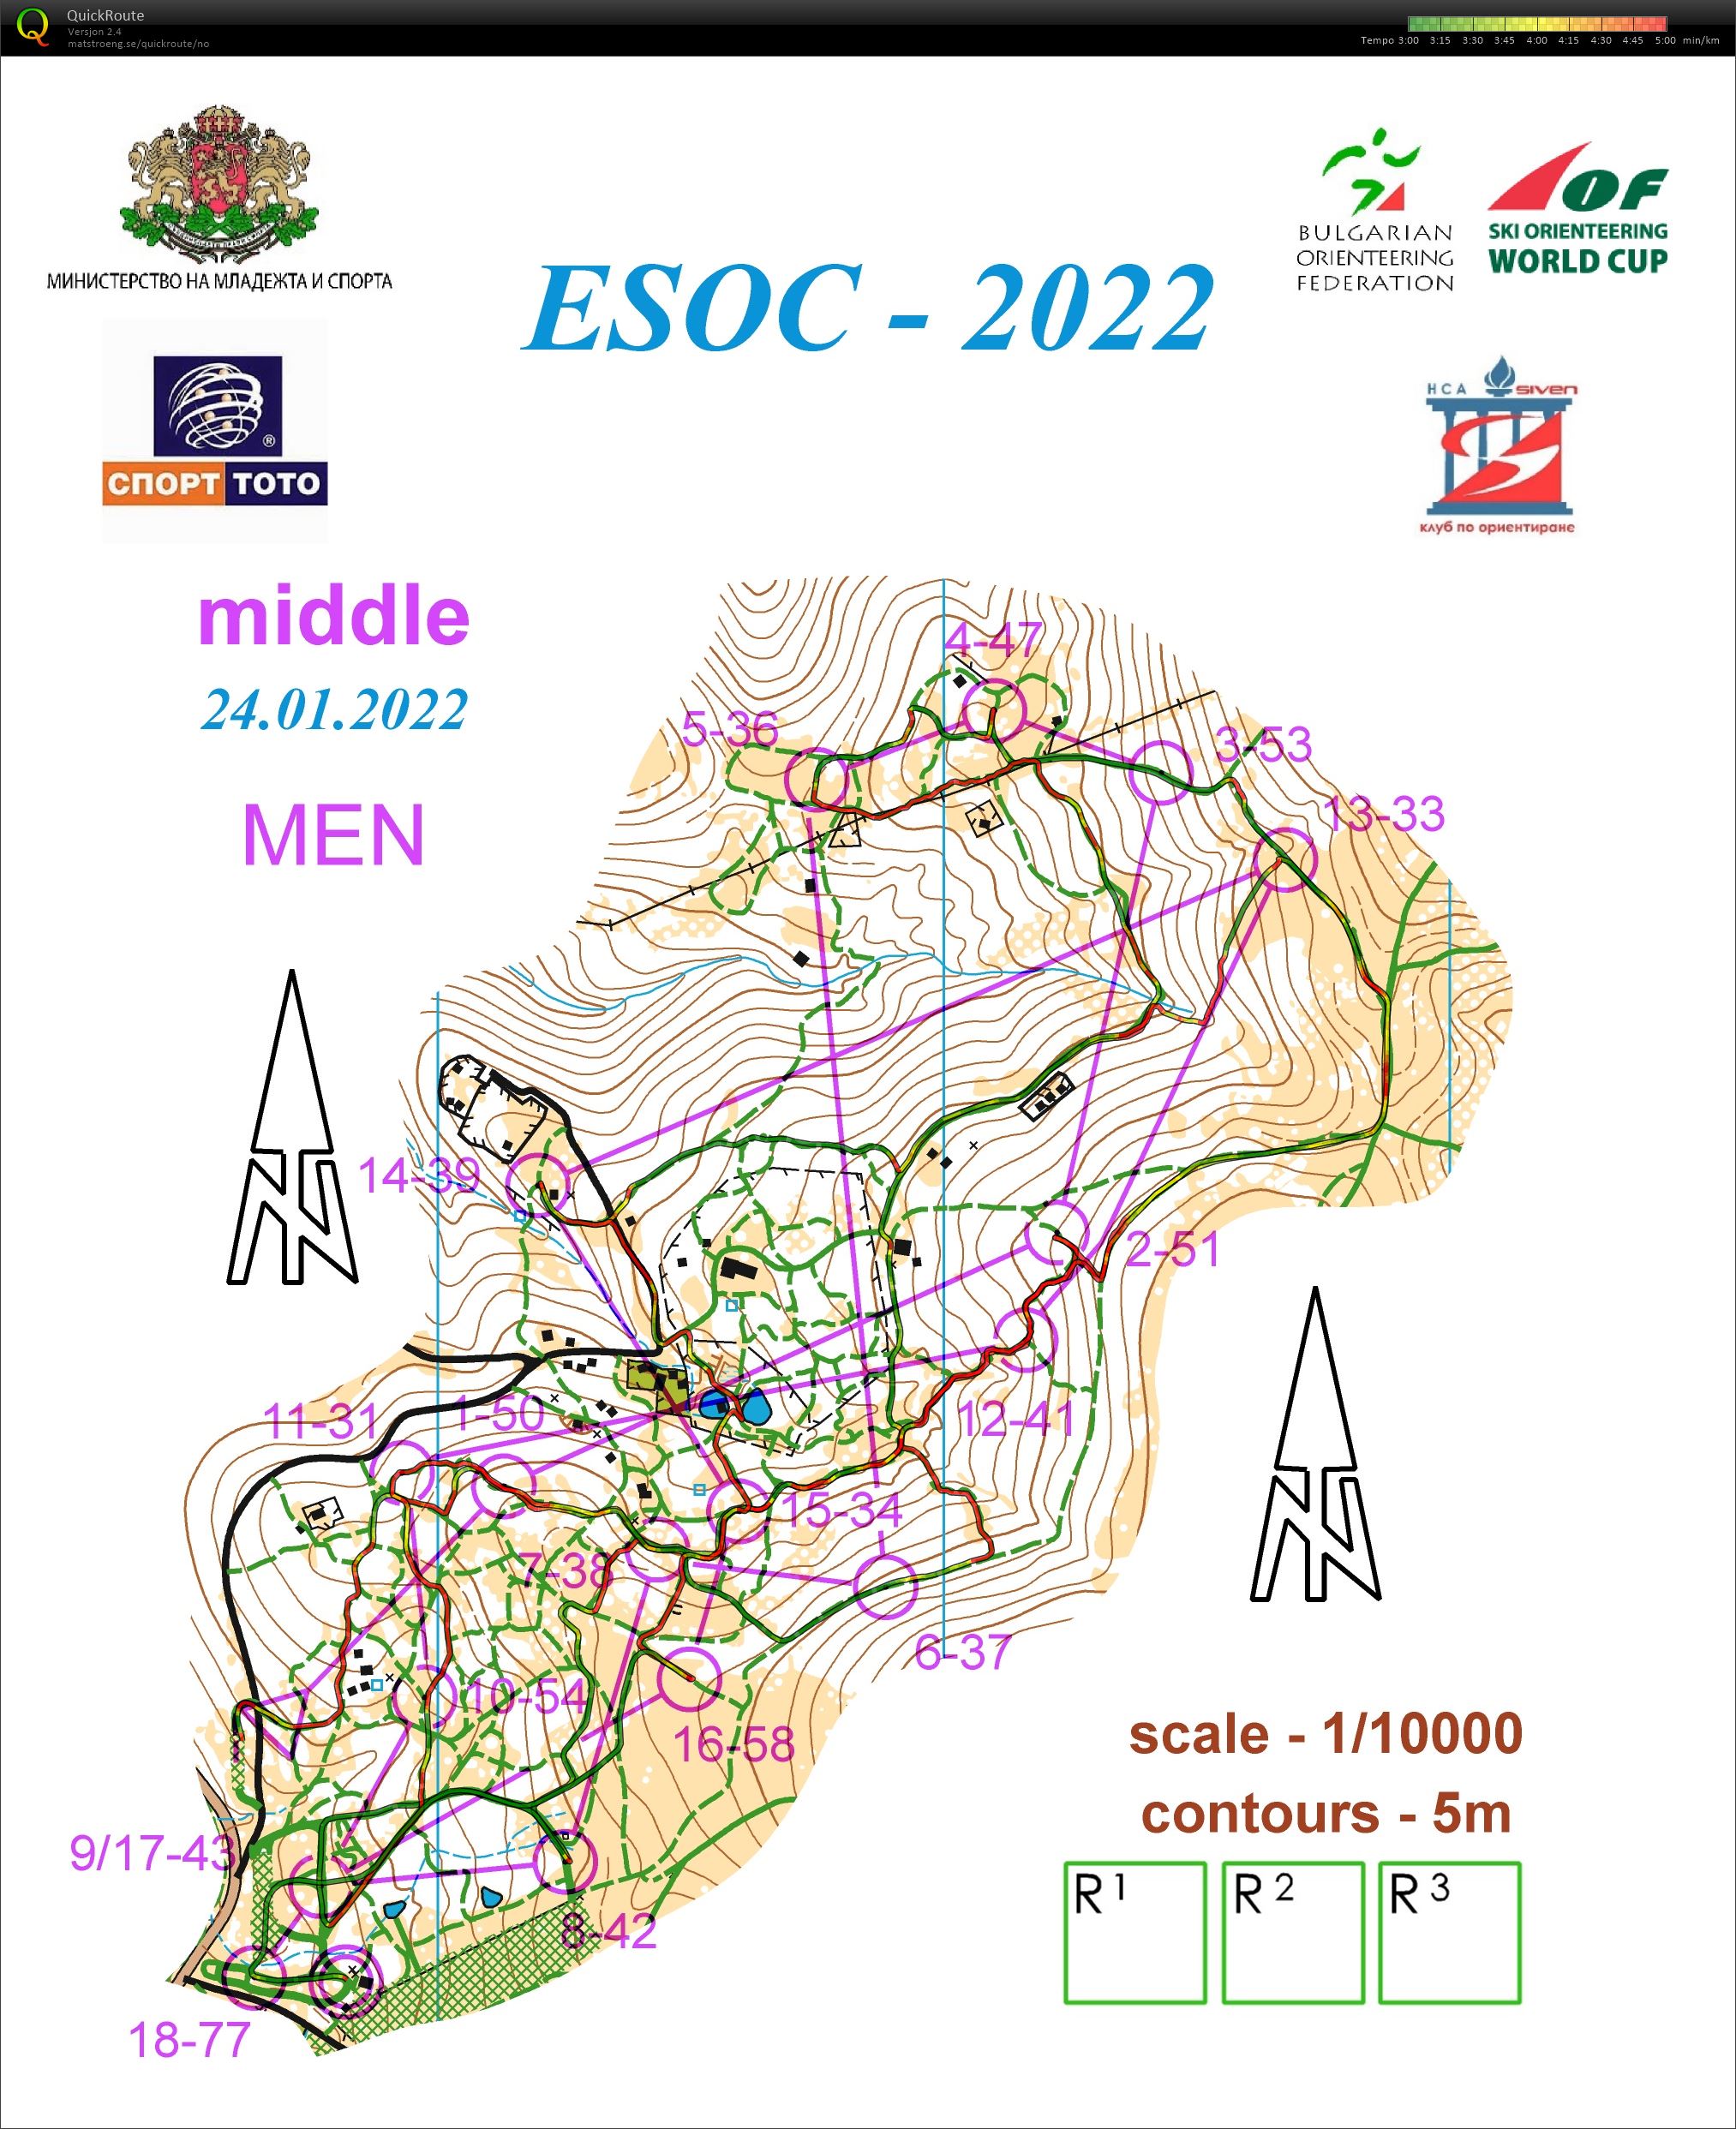 ESOC Middle (24.01.2022)